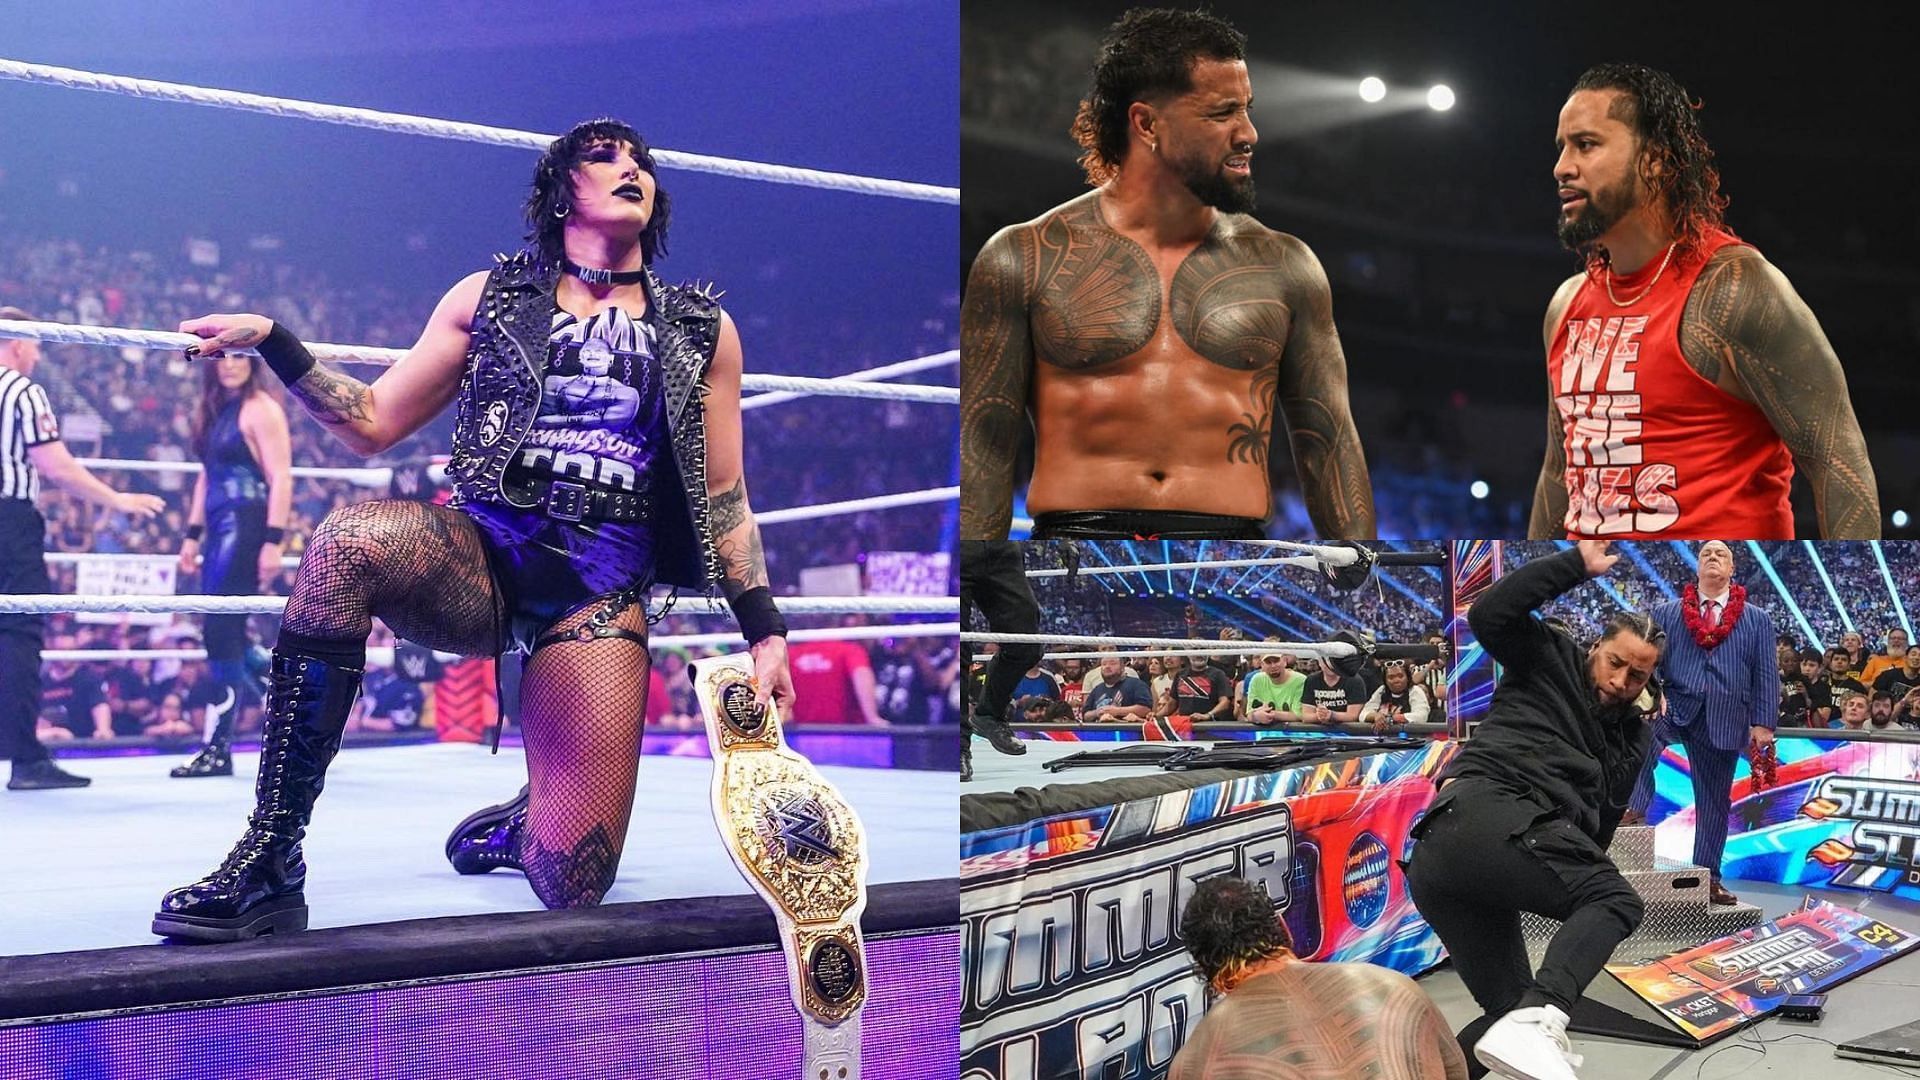 Could Rhea Ripley bring Jimmy Uso in The Judgment Day instead?